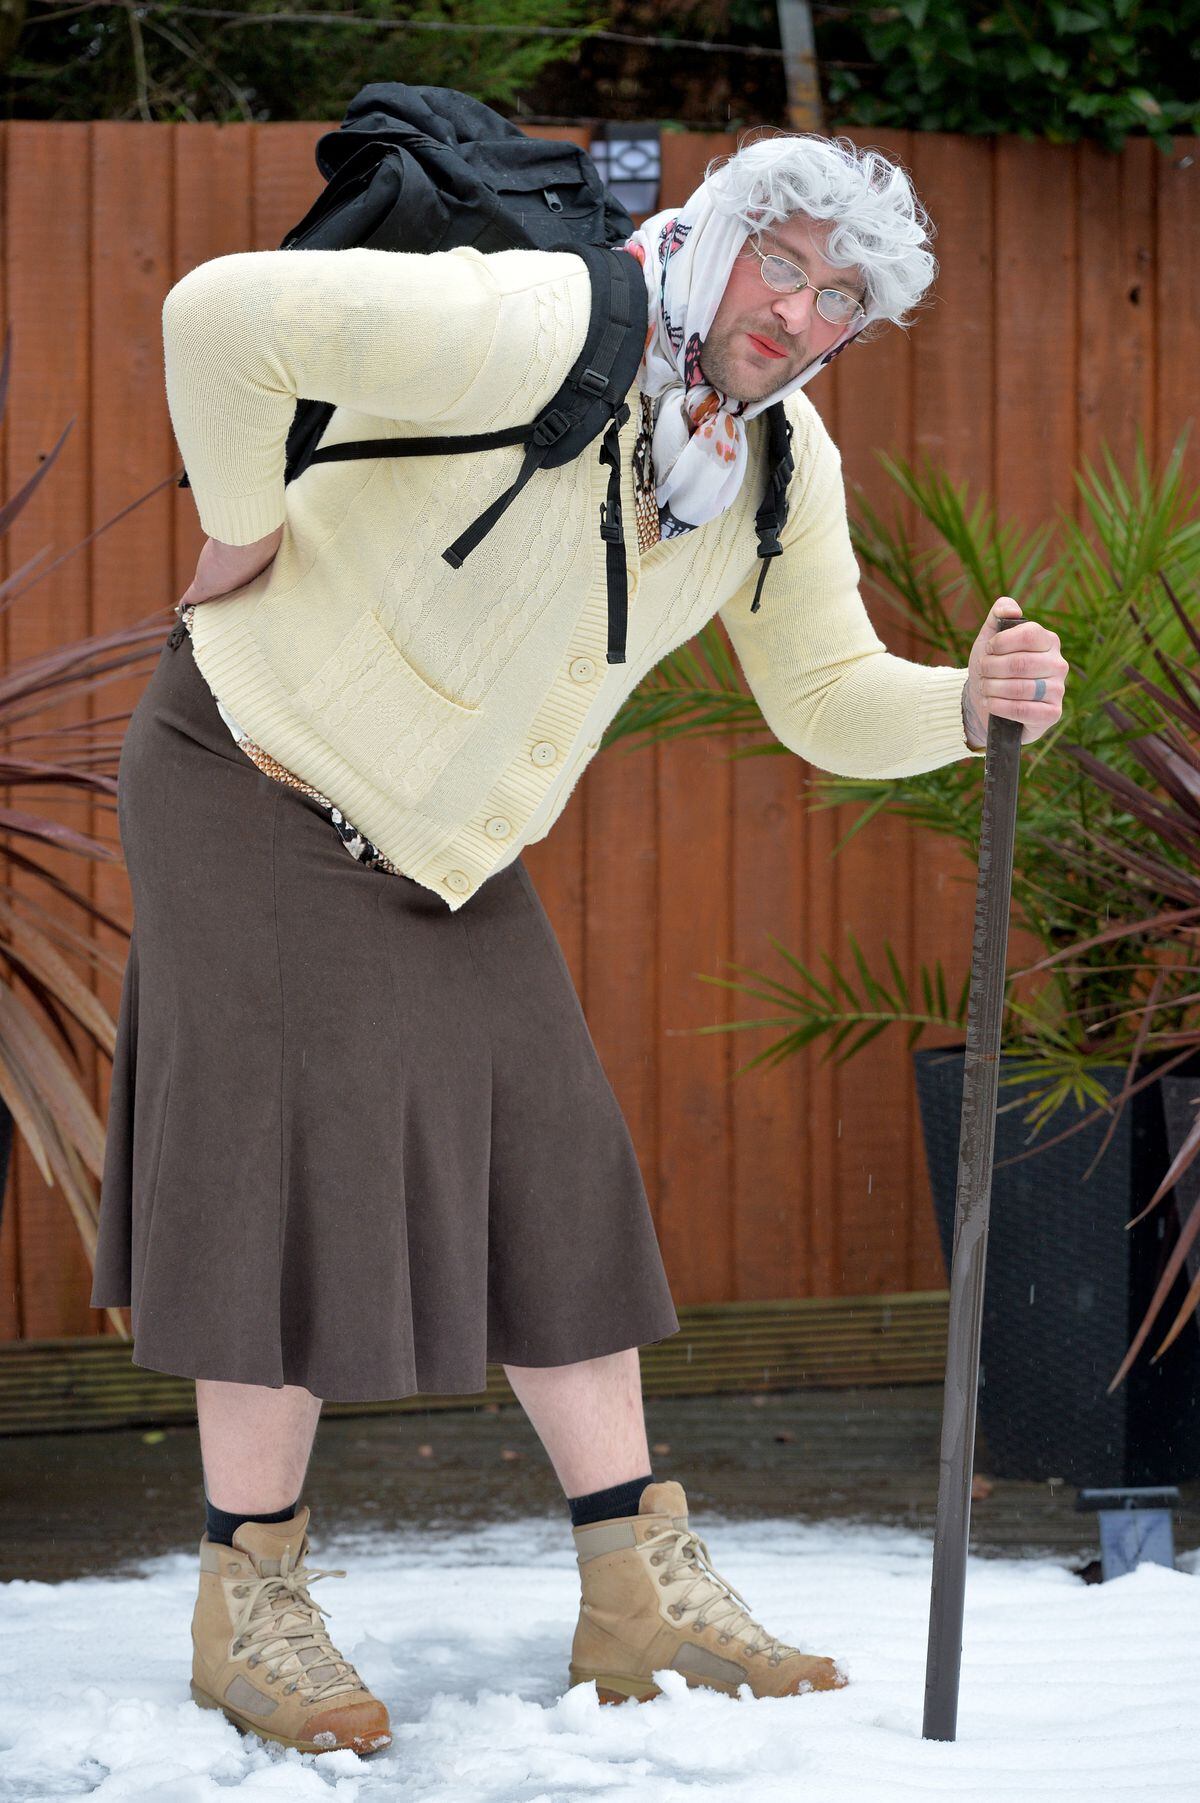 Martin Jones, from Willenhall, dressed as a granny for his charity challenge